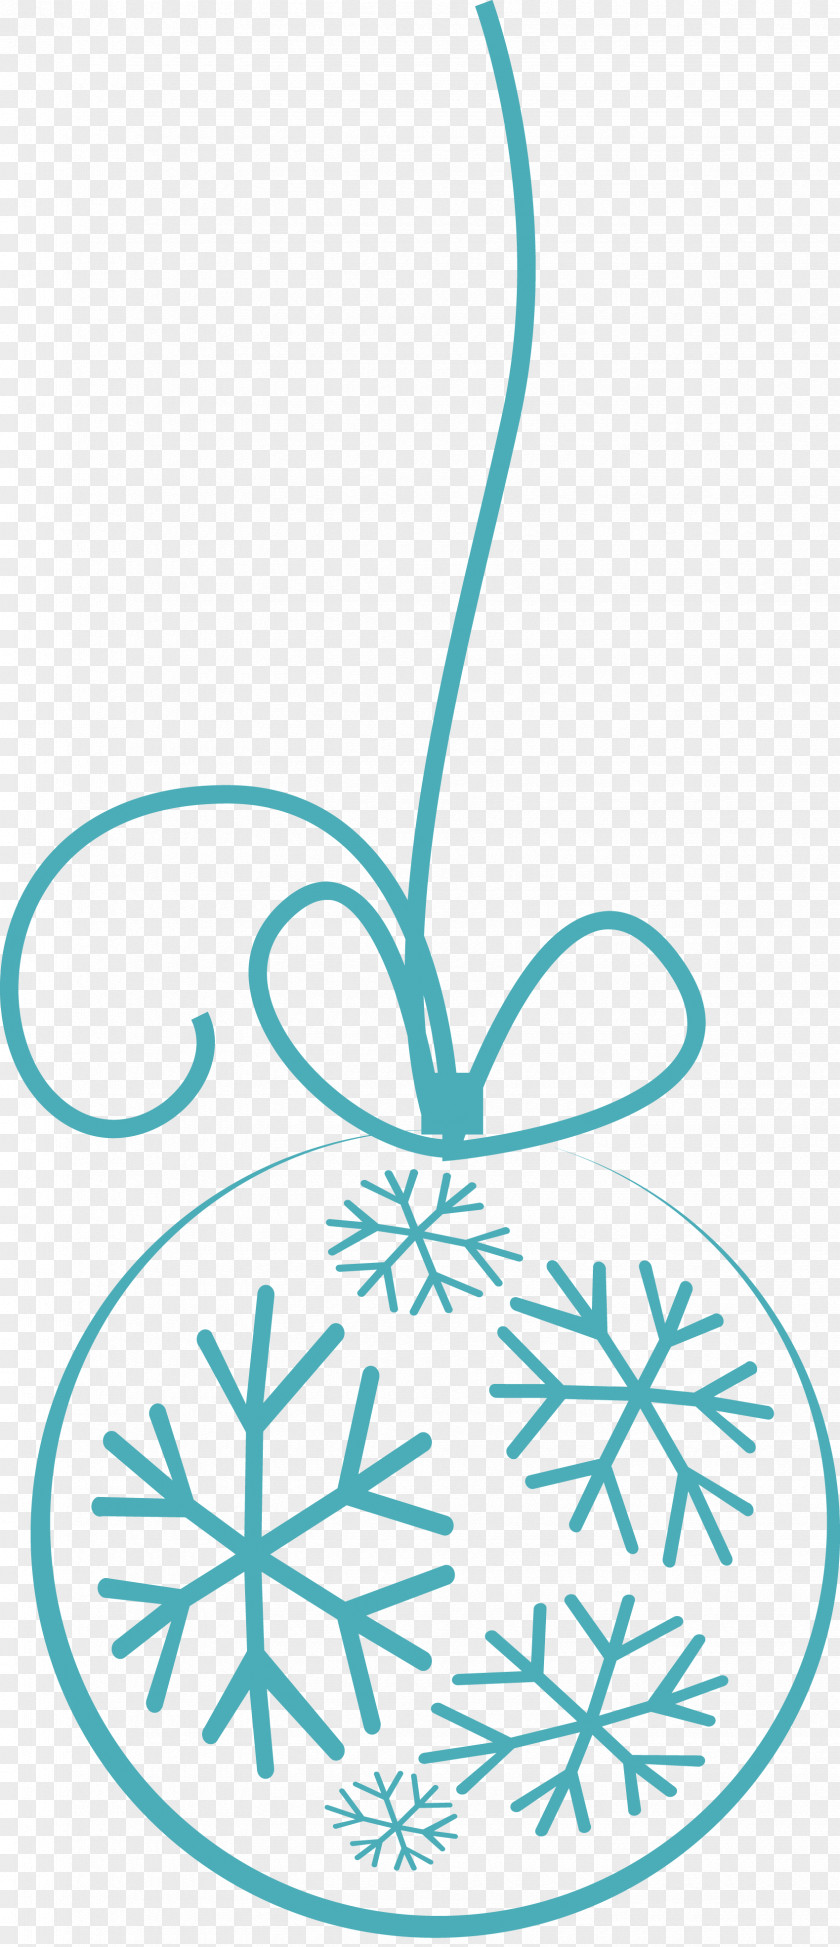 Snow Bell New Year Christmas Snowflake PNG